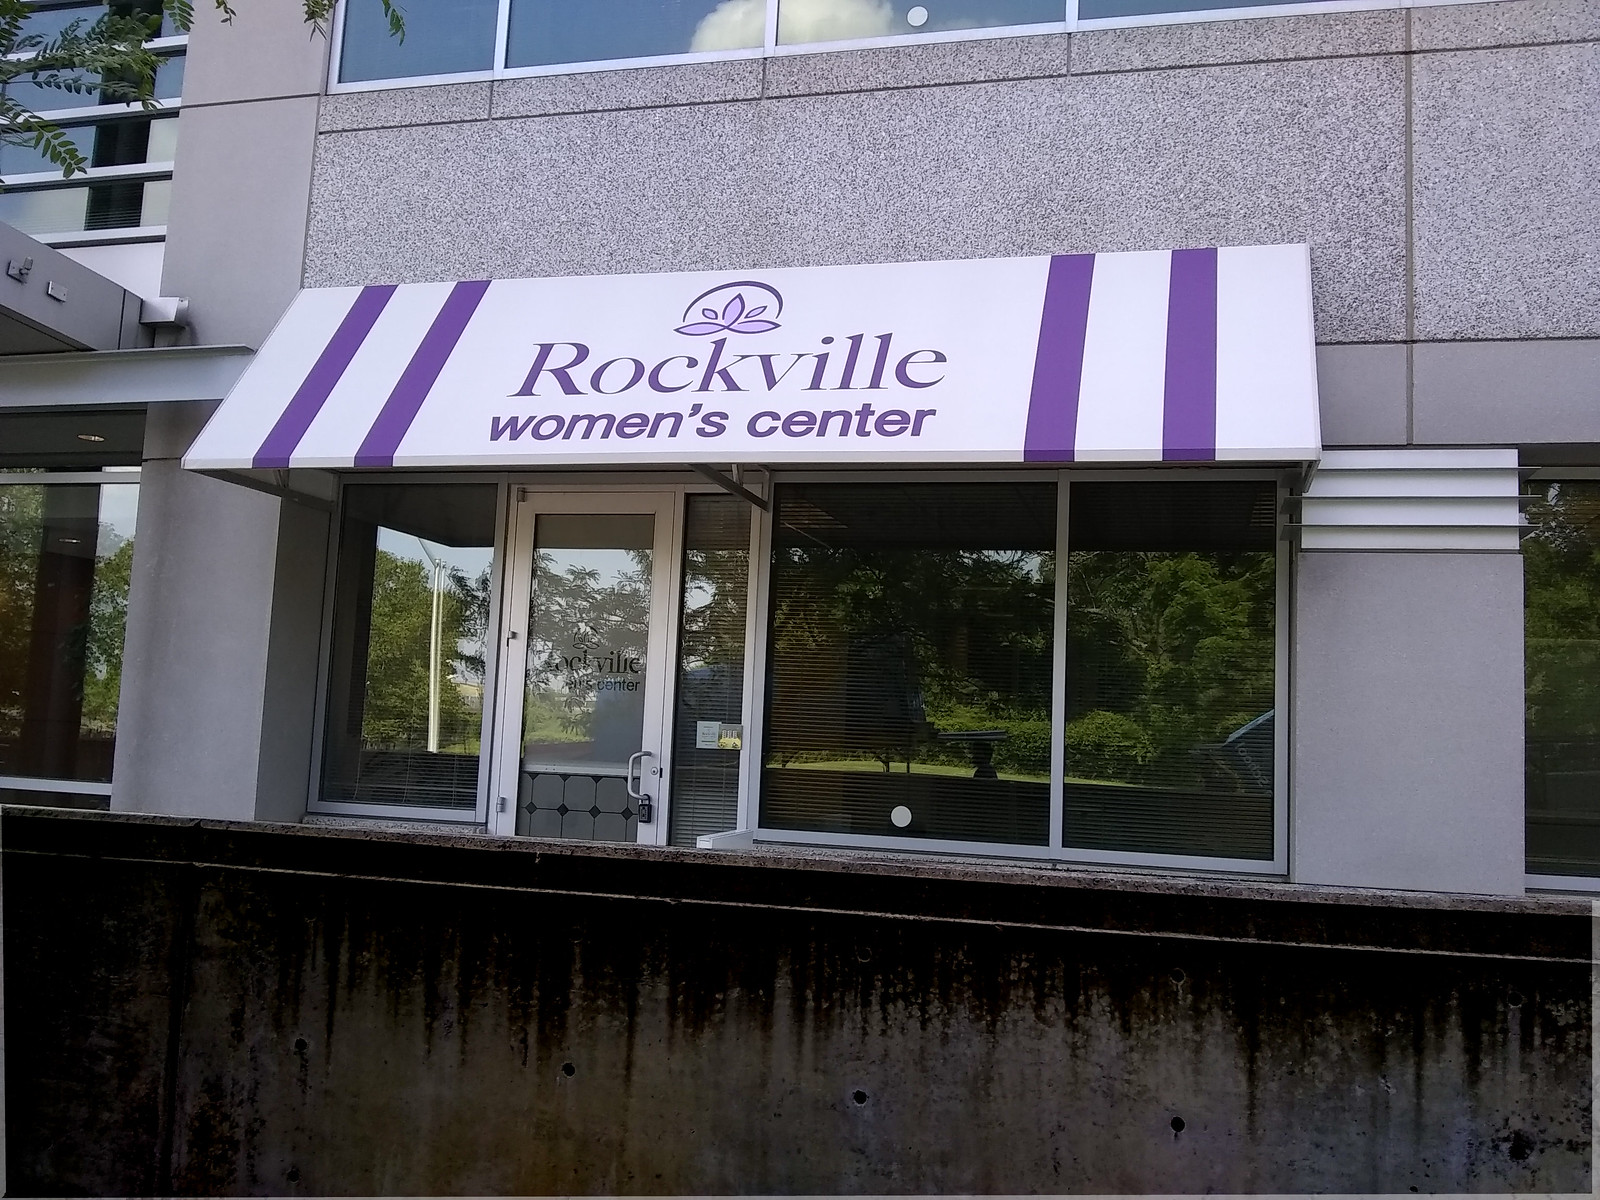 Commercial Storefront Awning